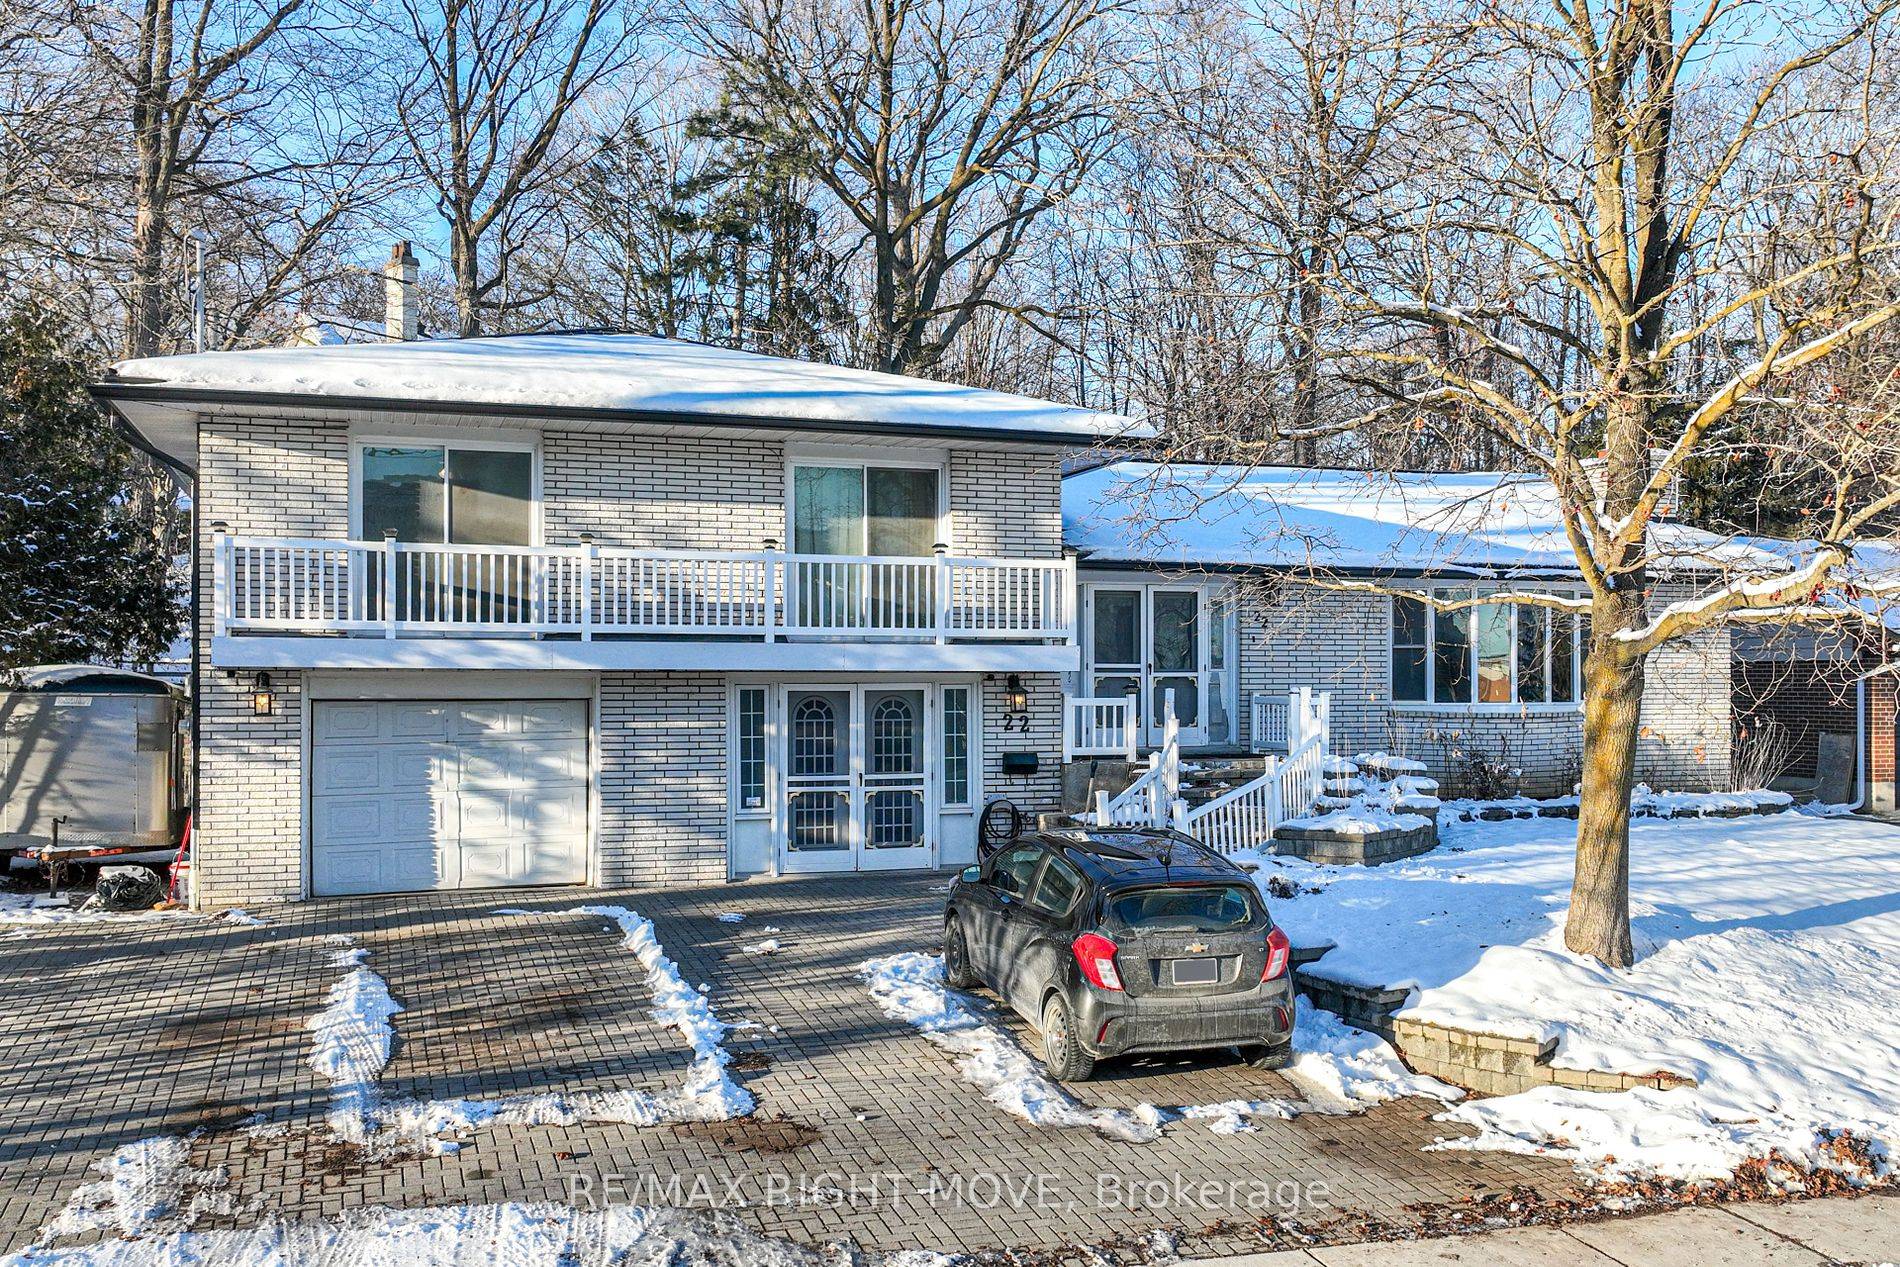 Welcome to 22 Brant Street in the charming north ward of Orillia, Ontario.